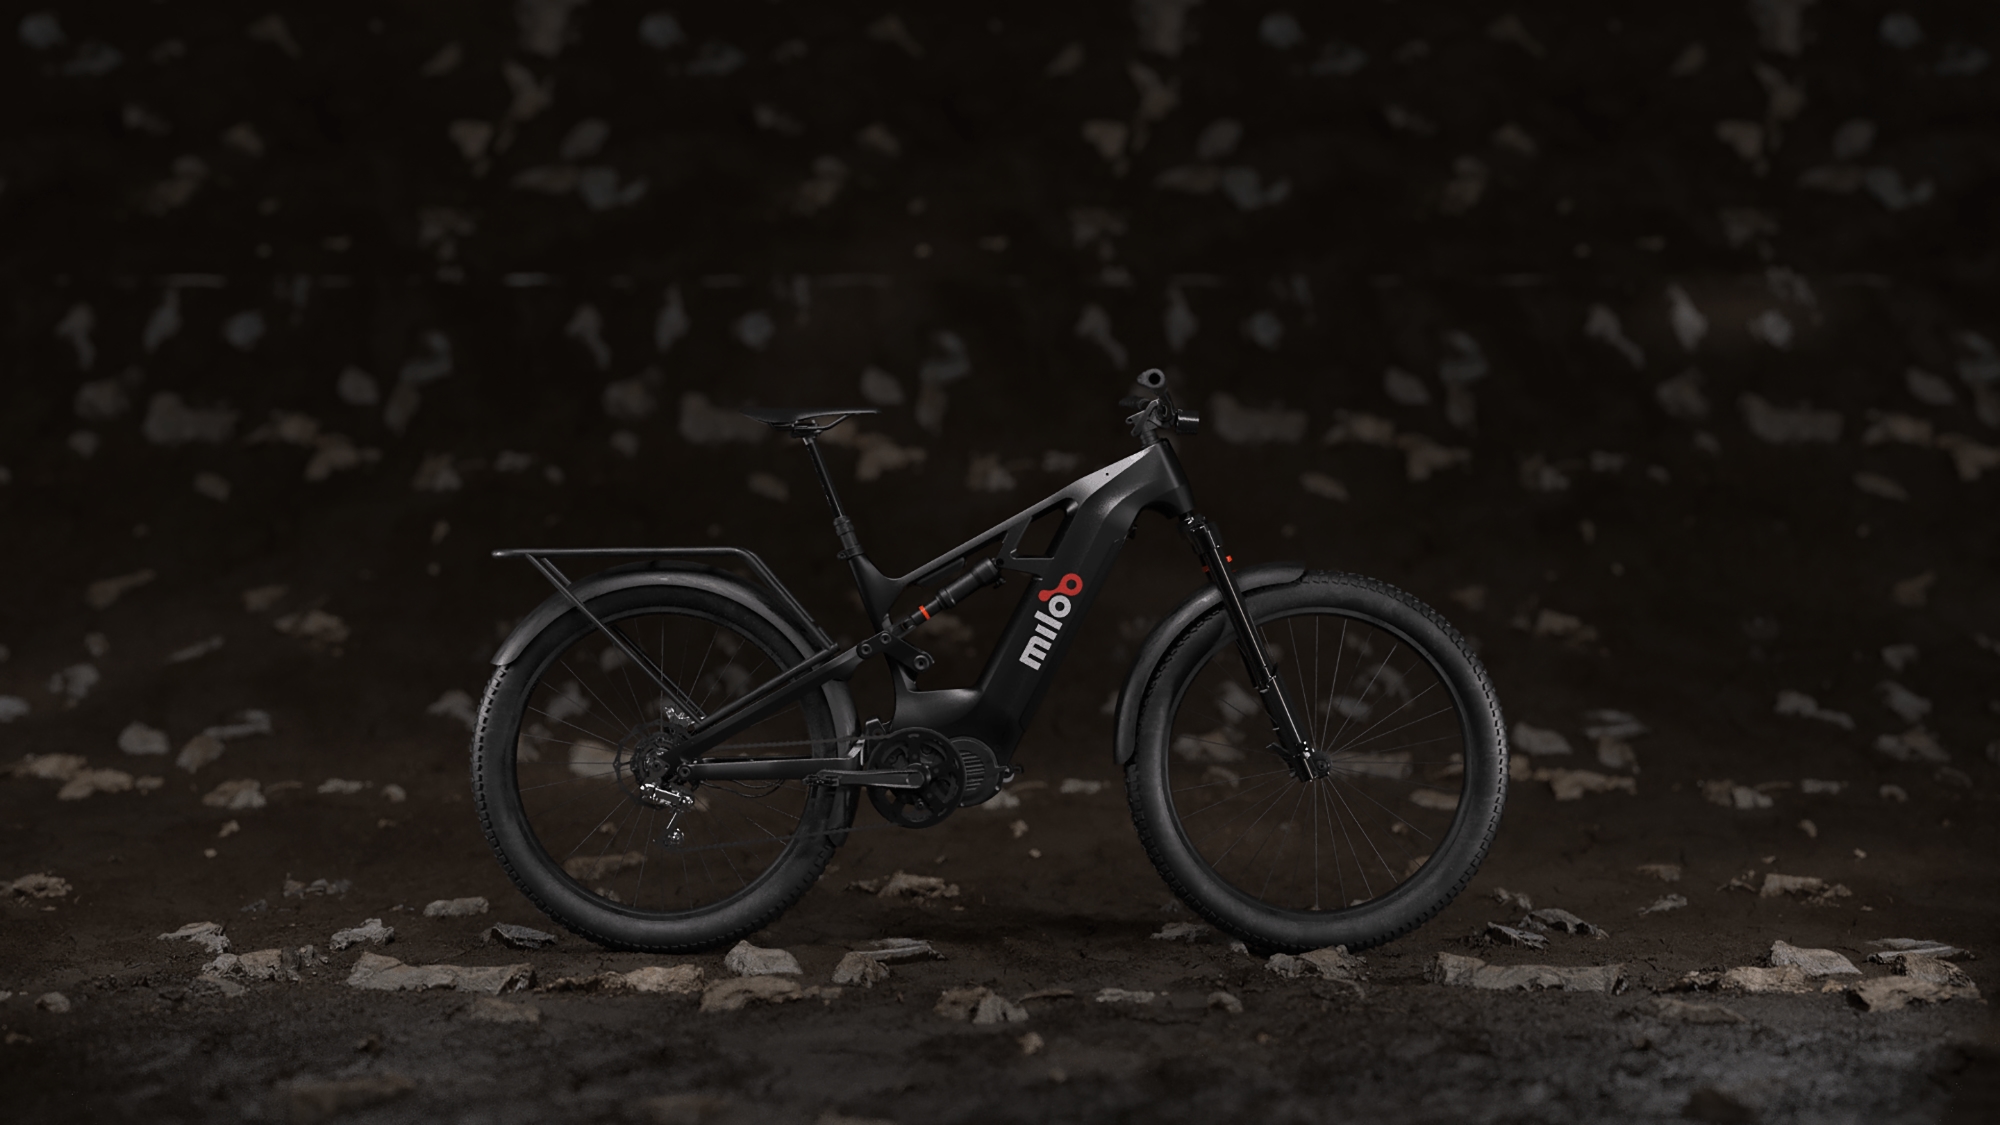 Miloo Xplorer Beast: an electric bike made from recycled Nespresso coffee capsules